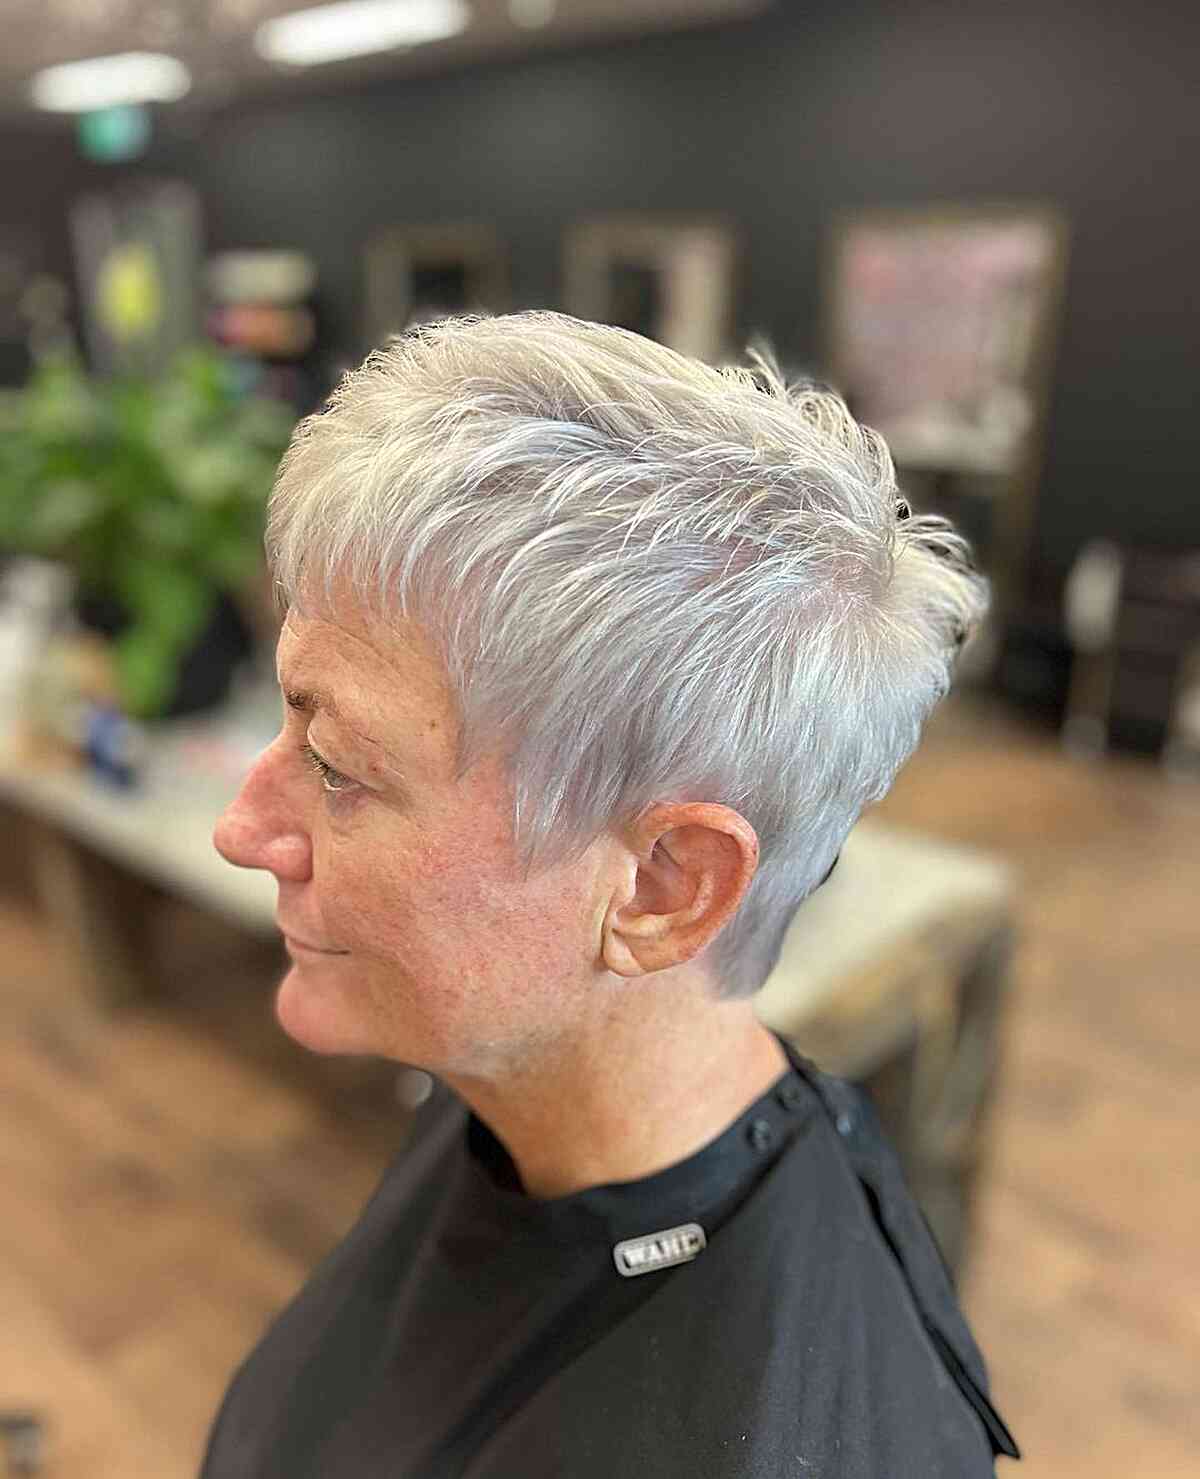 Platinum Blonde Choppy Pixie with Thin Bangs for women 60 and up